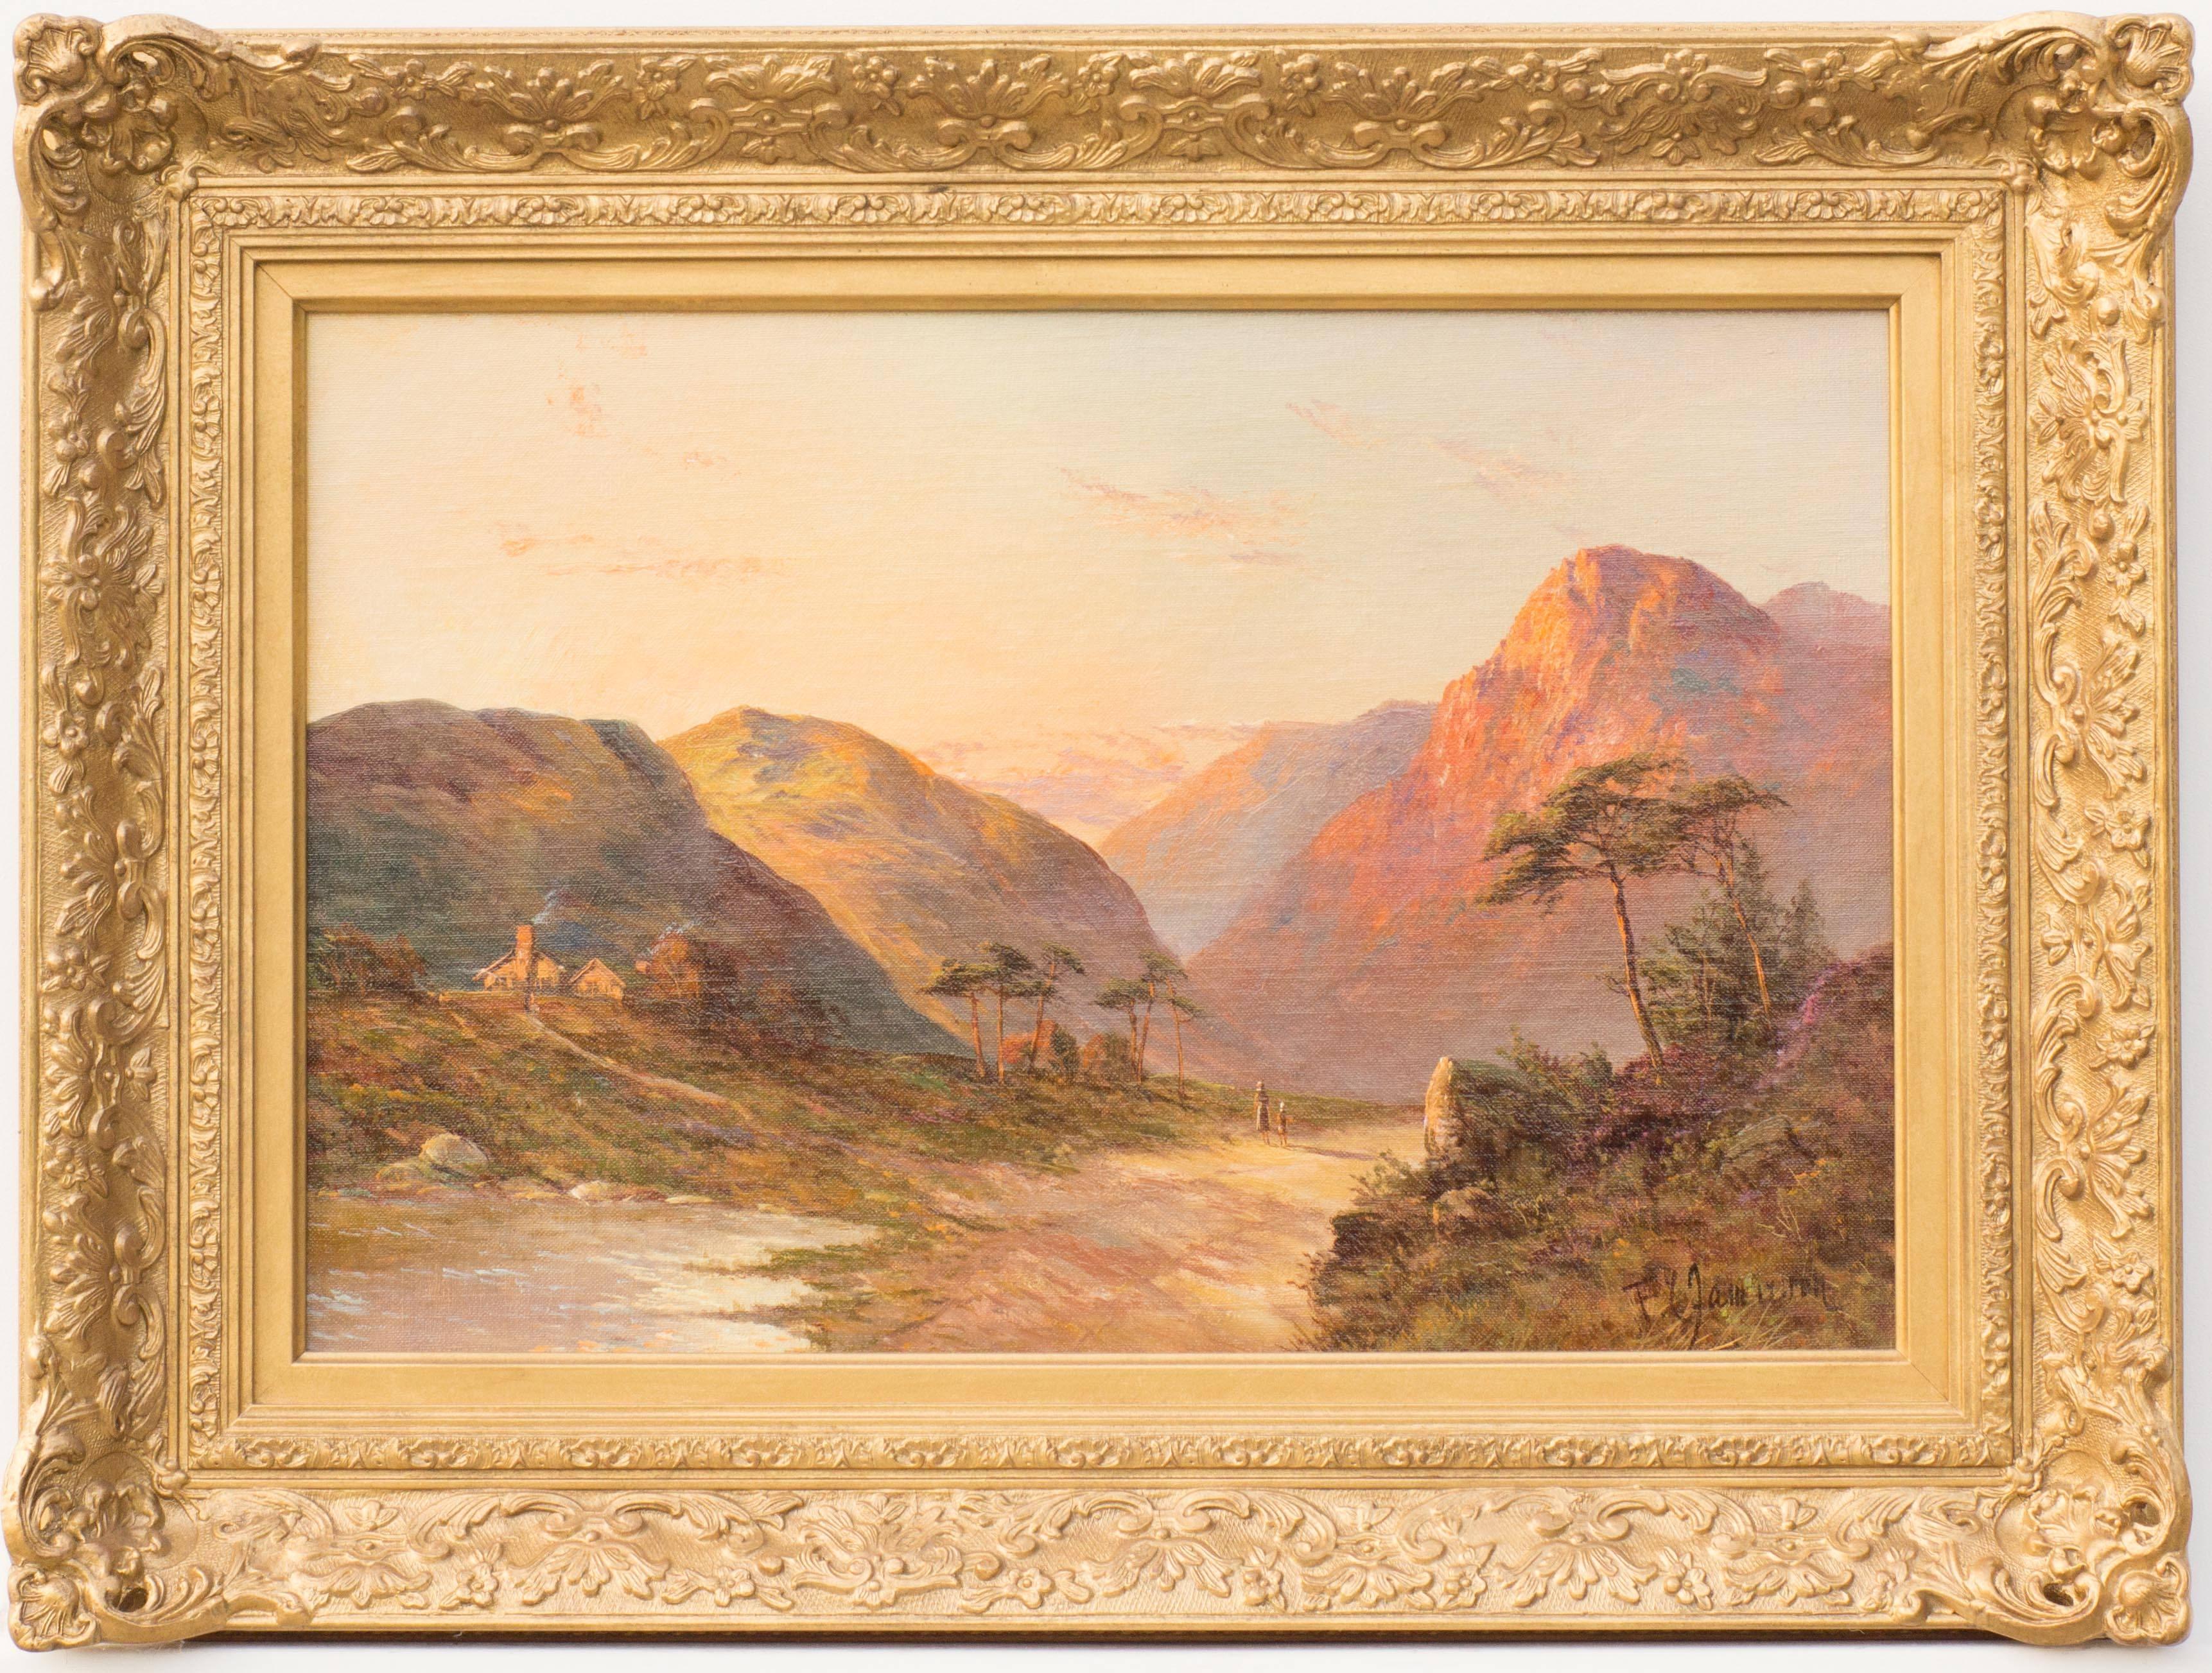 Francis E. Jamieson Landscape Painting - The Old Road, Glencoe, Original Oil On Canvas Painting